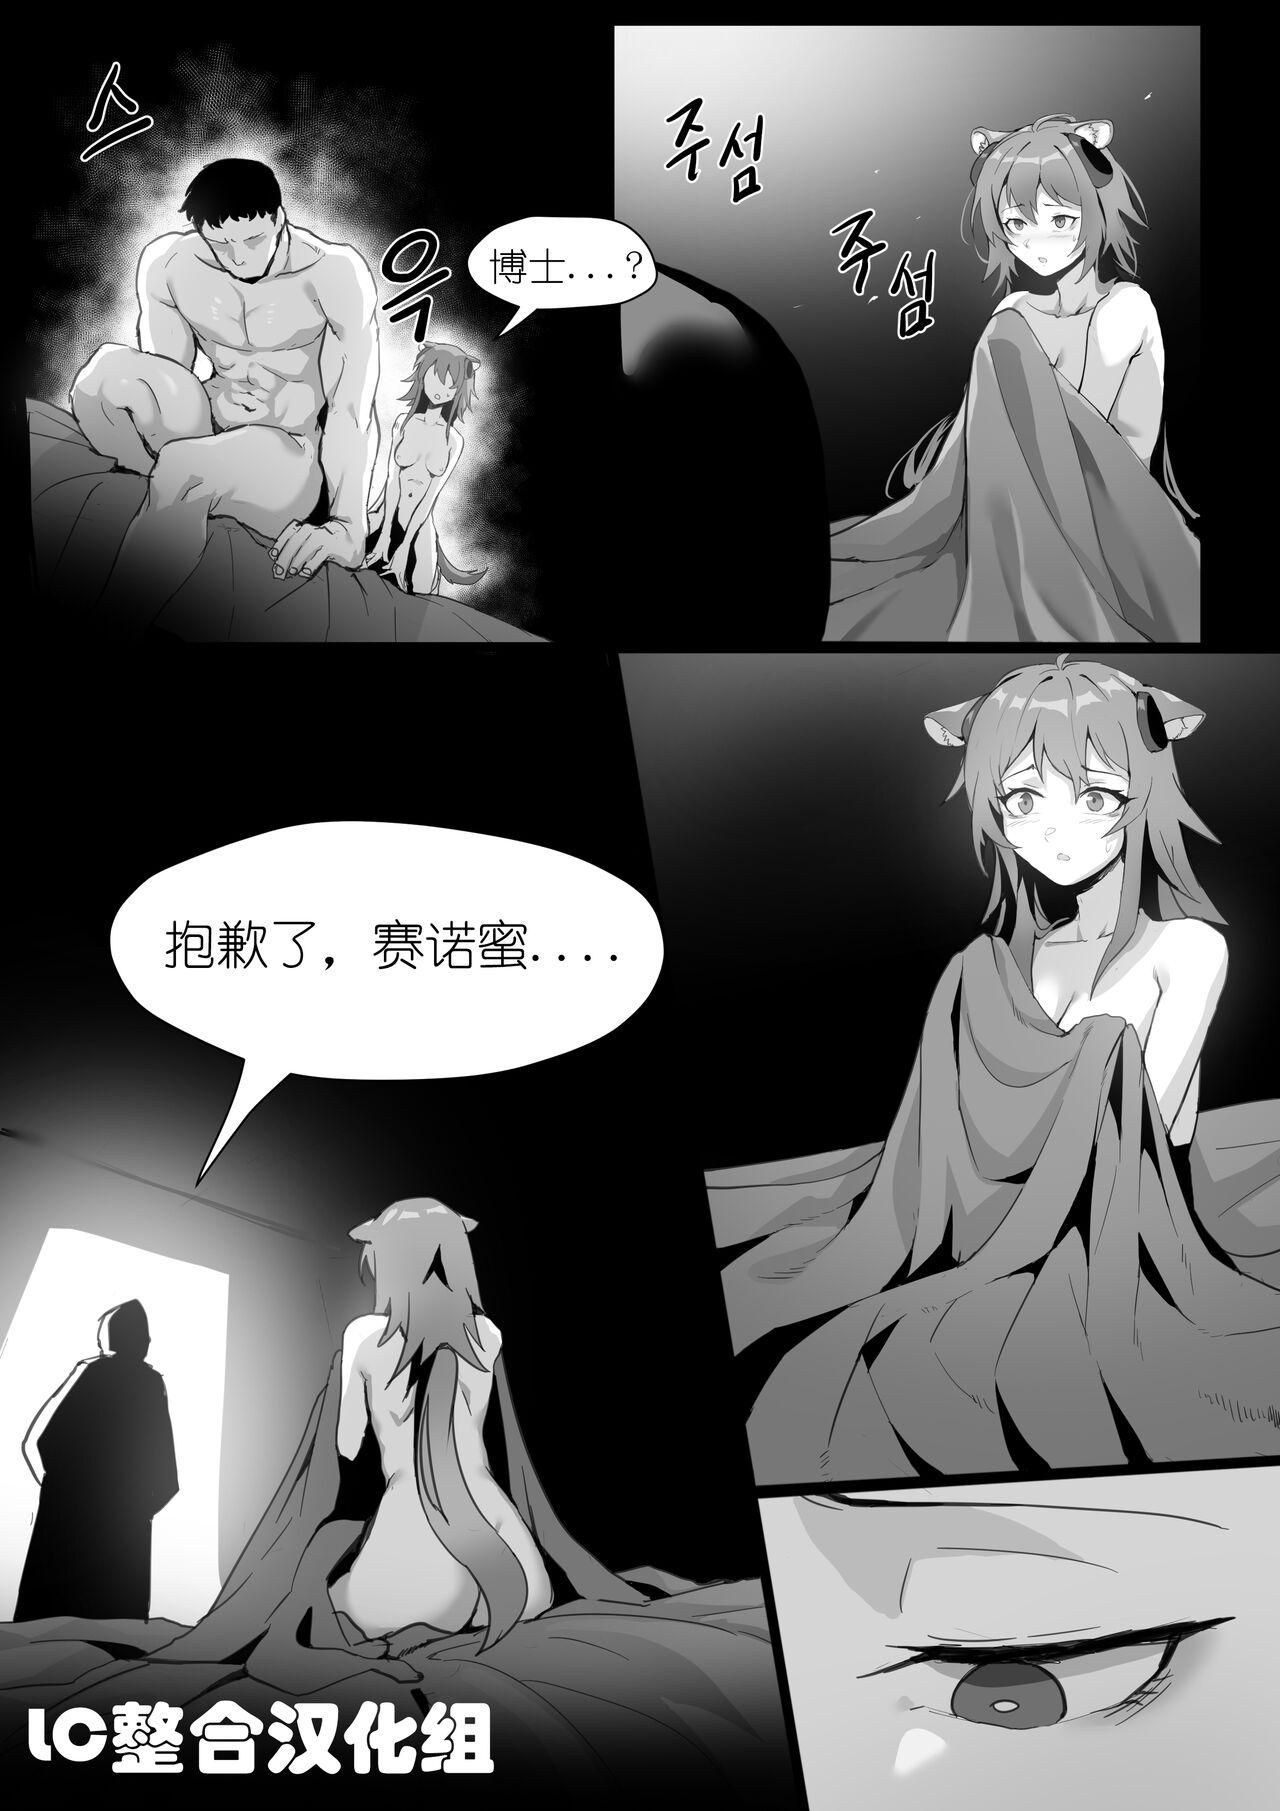 Creampie 欲望方舟记录3 - Arknights Made - Page 5